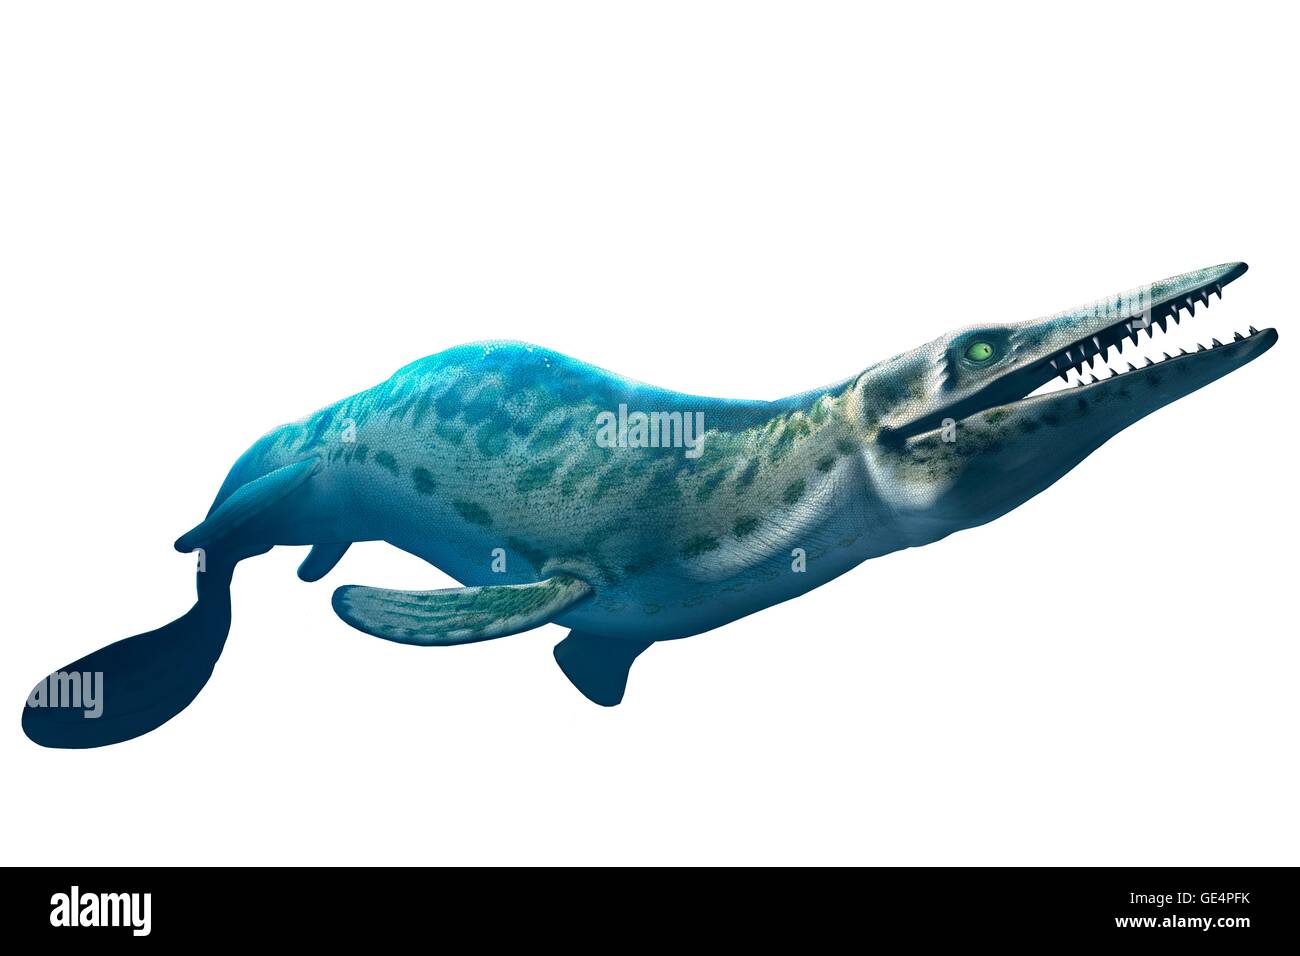 The mosasaur is an extinct marine reptile that lived 70-65 million years ago. It had a long, barrel-shaped body, paddle-like flippers and a large heavy skull. It grew over 15 metres in length and weighed roughly 15 tons. Stock Photo